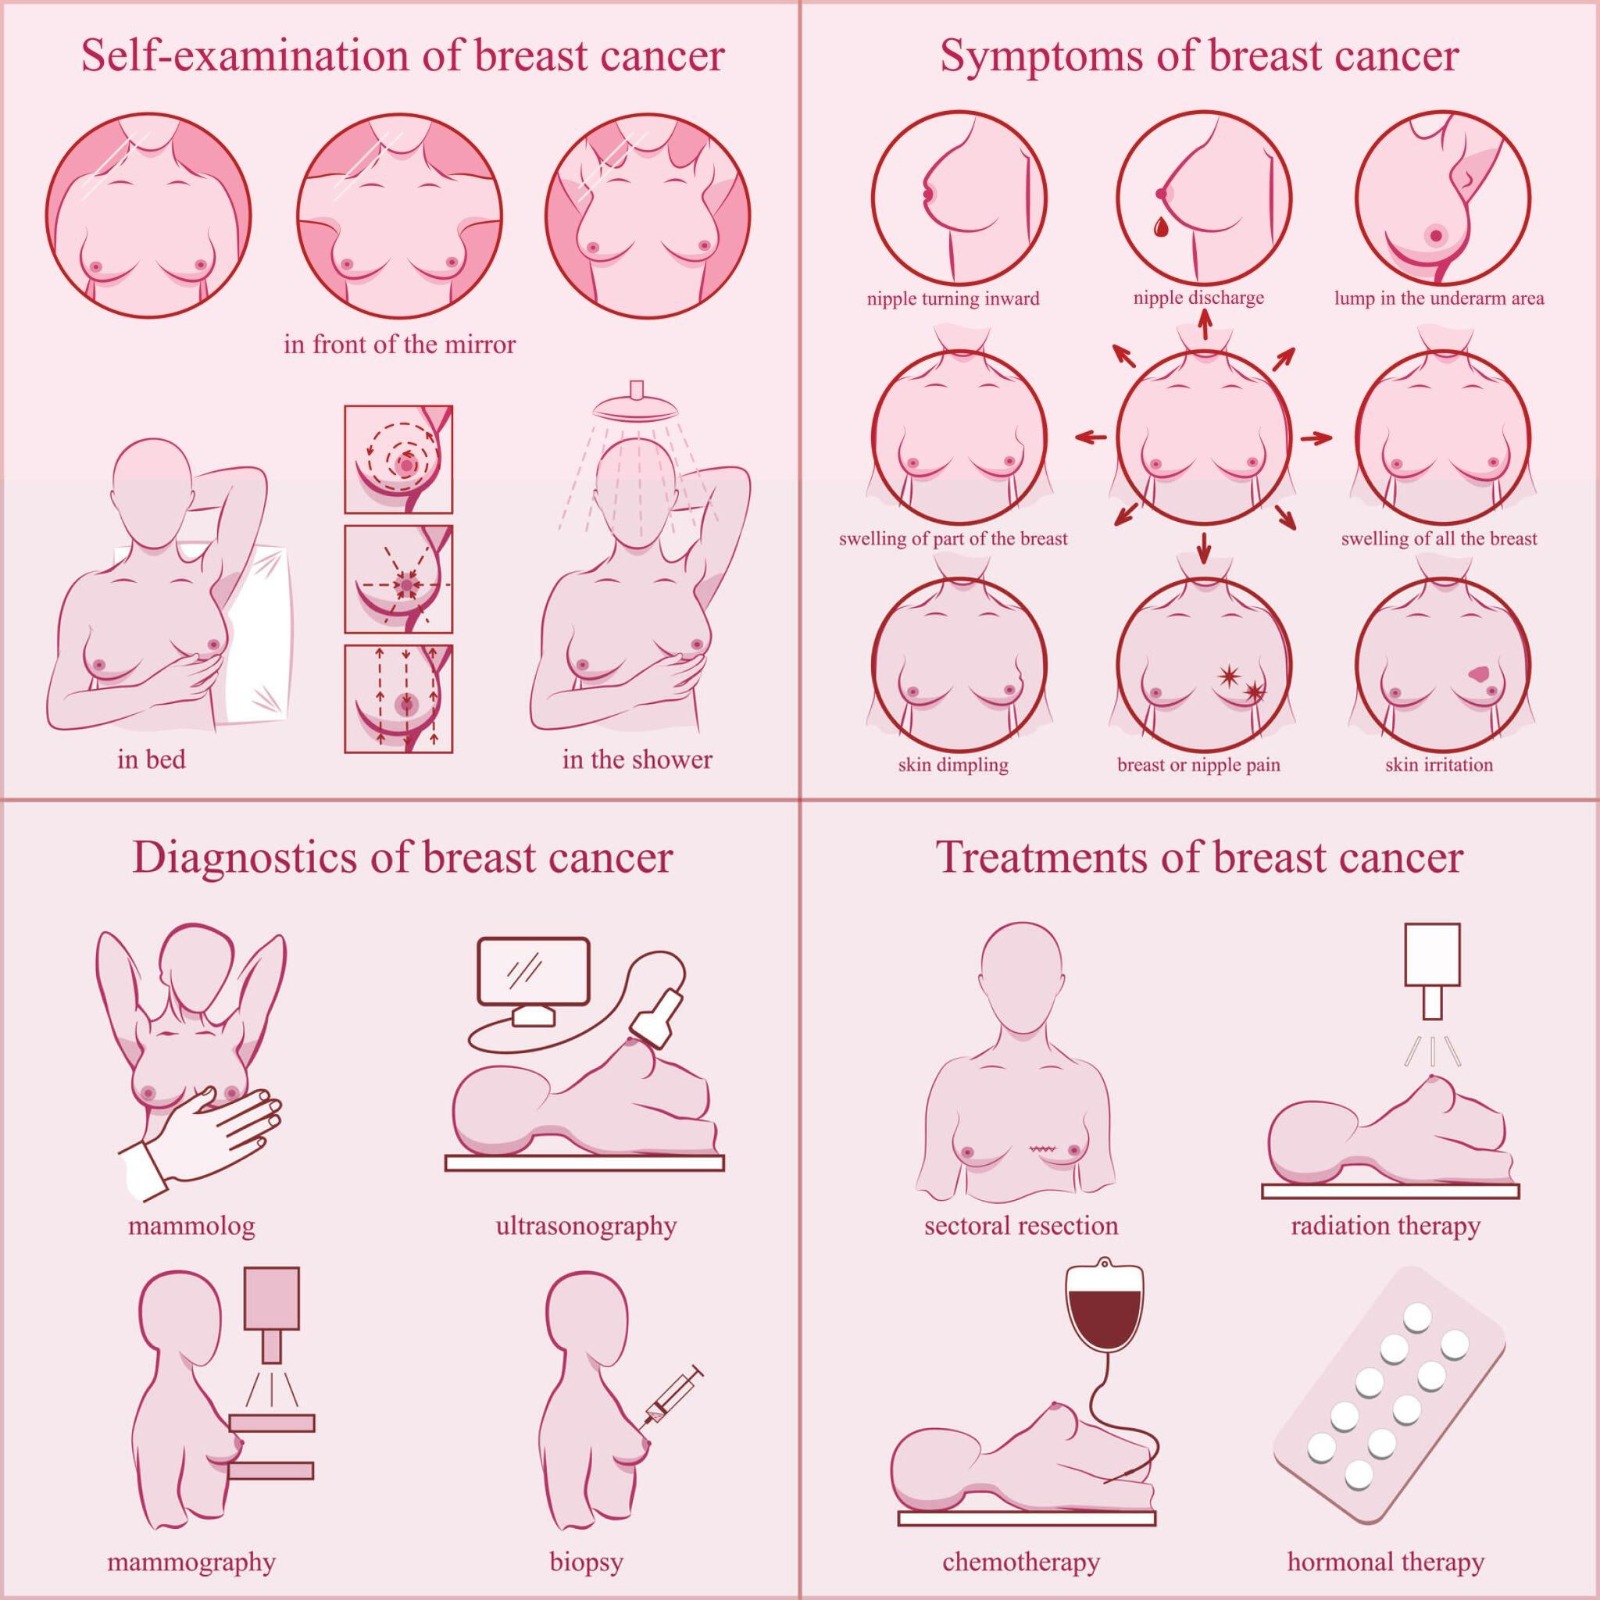 know your breast health: breast cancer symptoms, diagnosis and treatments